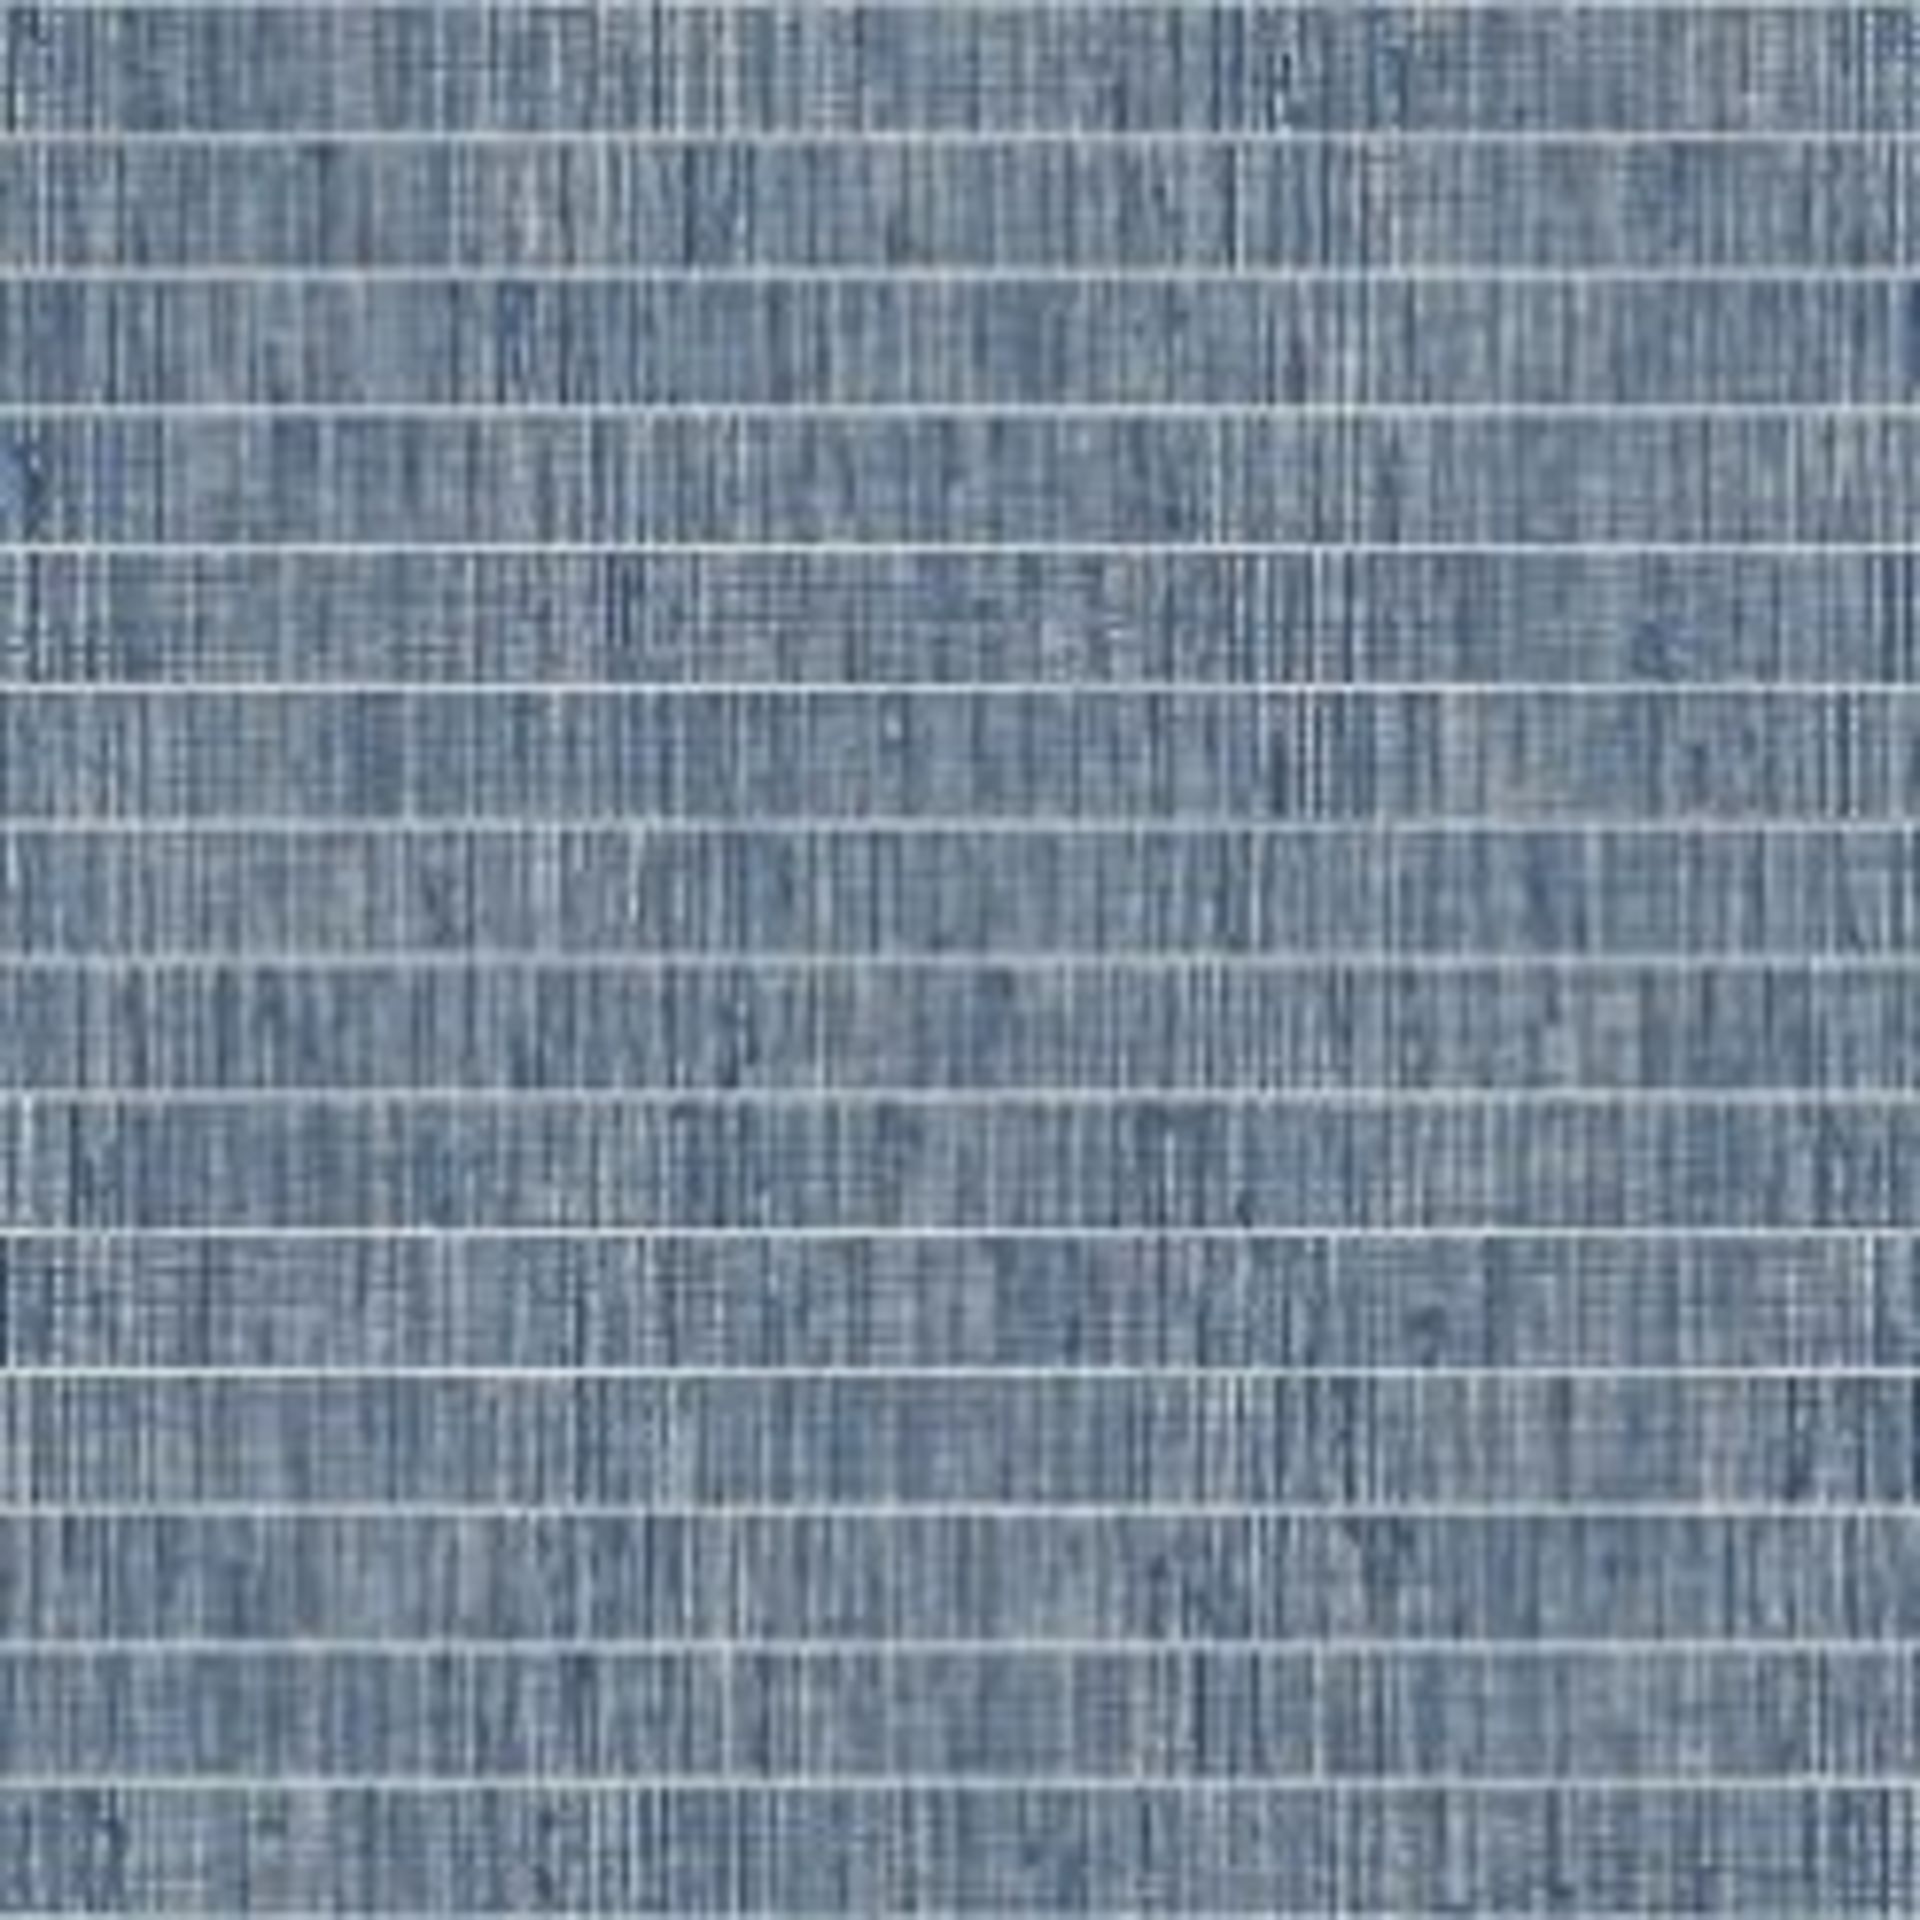 142 Rolls of More Textures Wallpaper (Bays 1565 – 1597) (Library Images – Some Colours May Not Be - Image 6 of 49